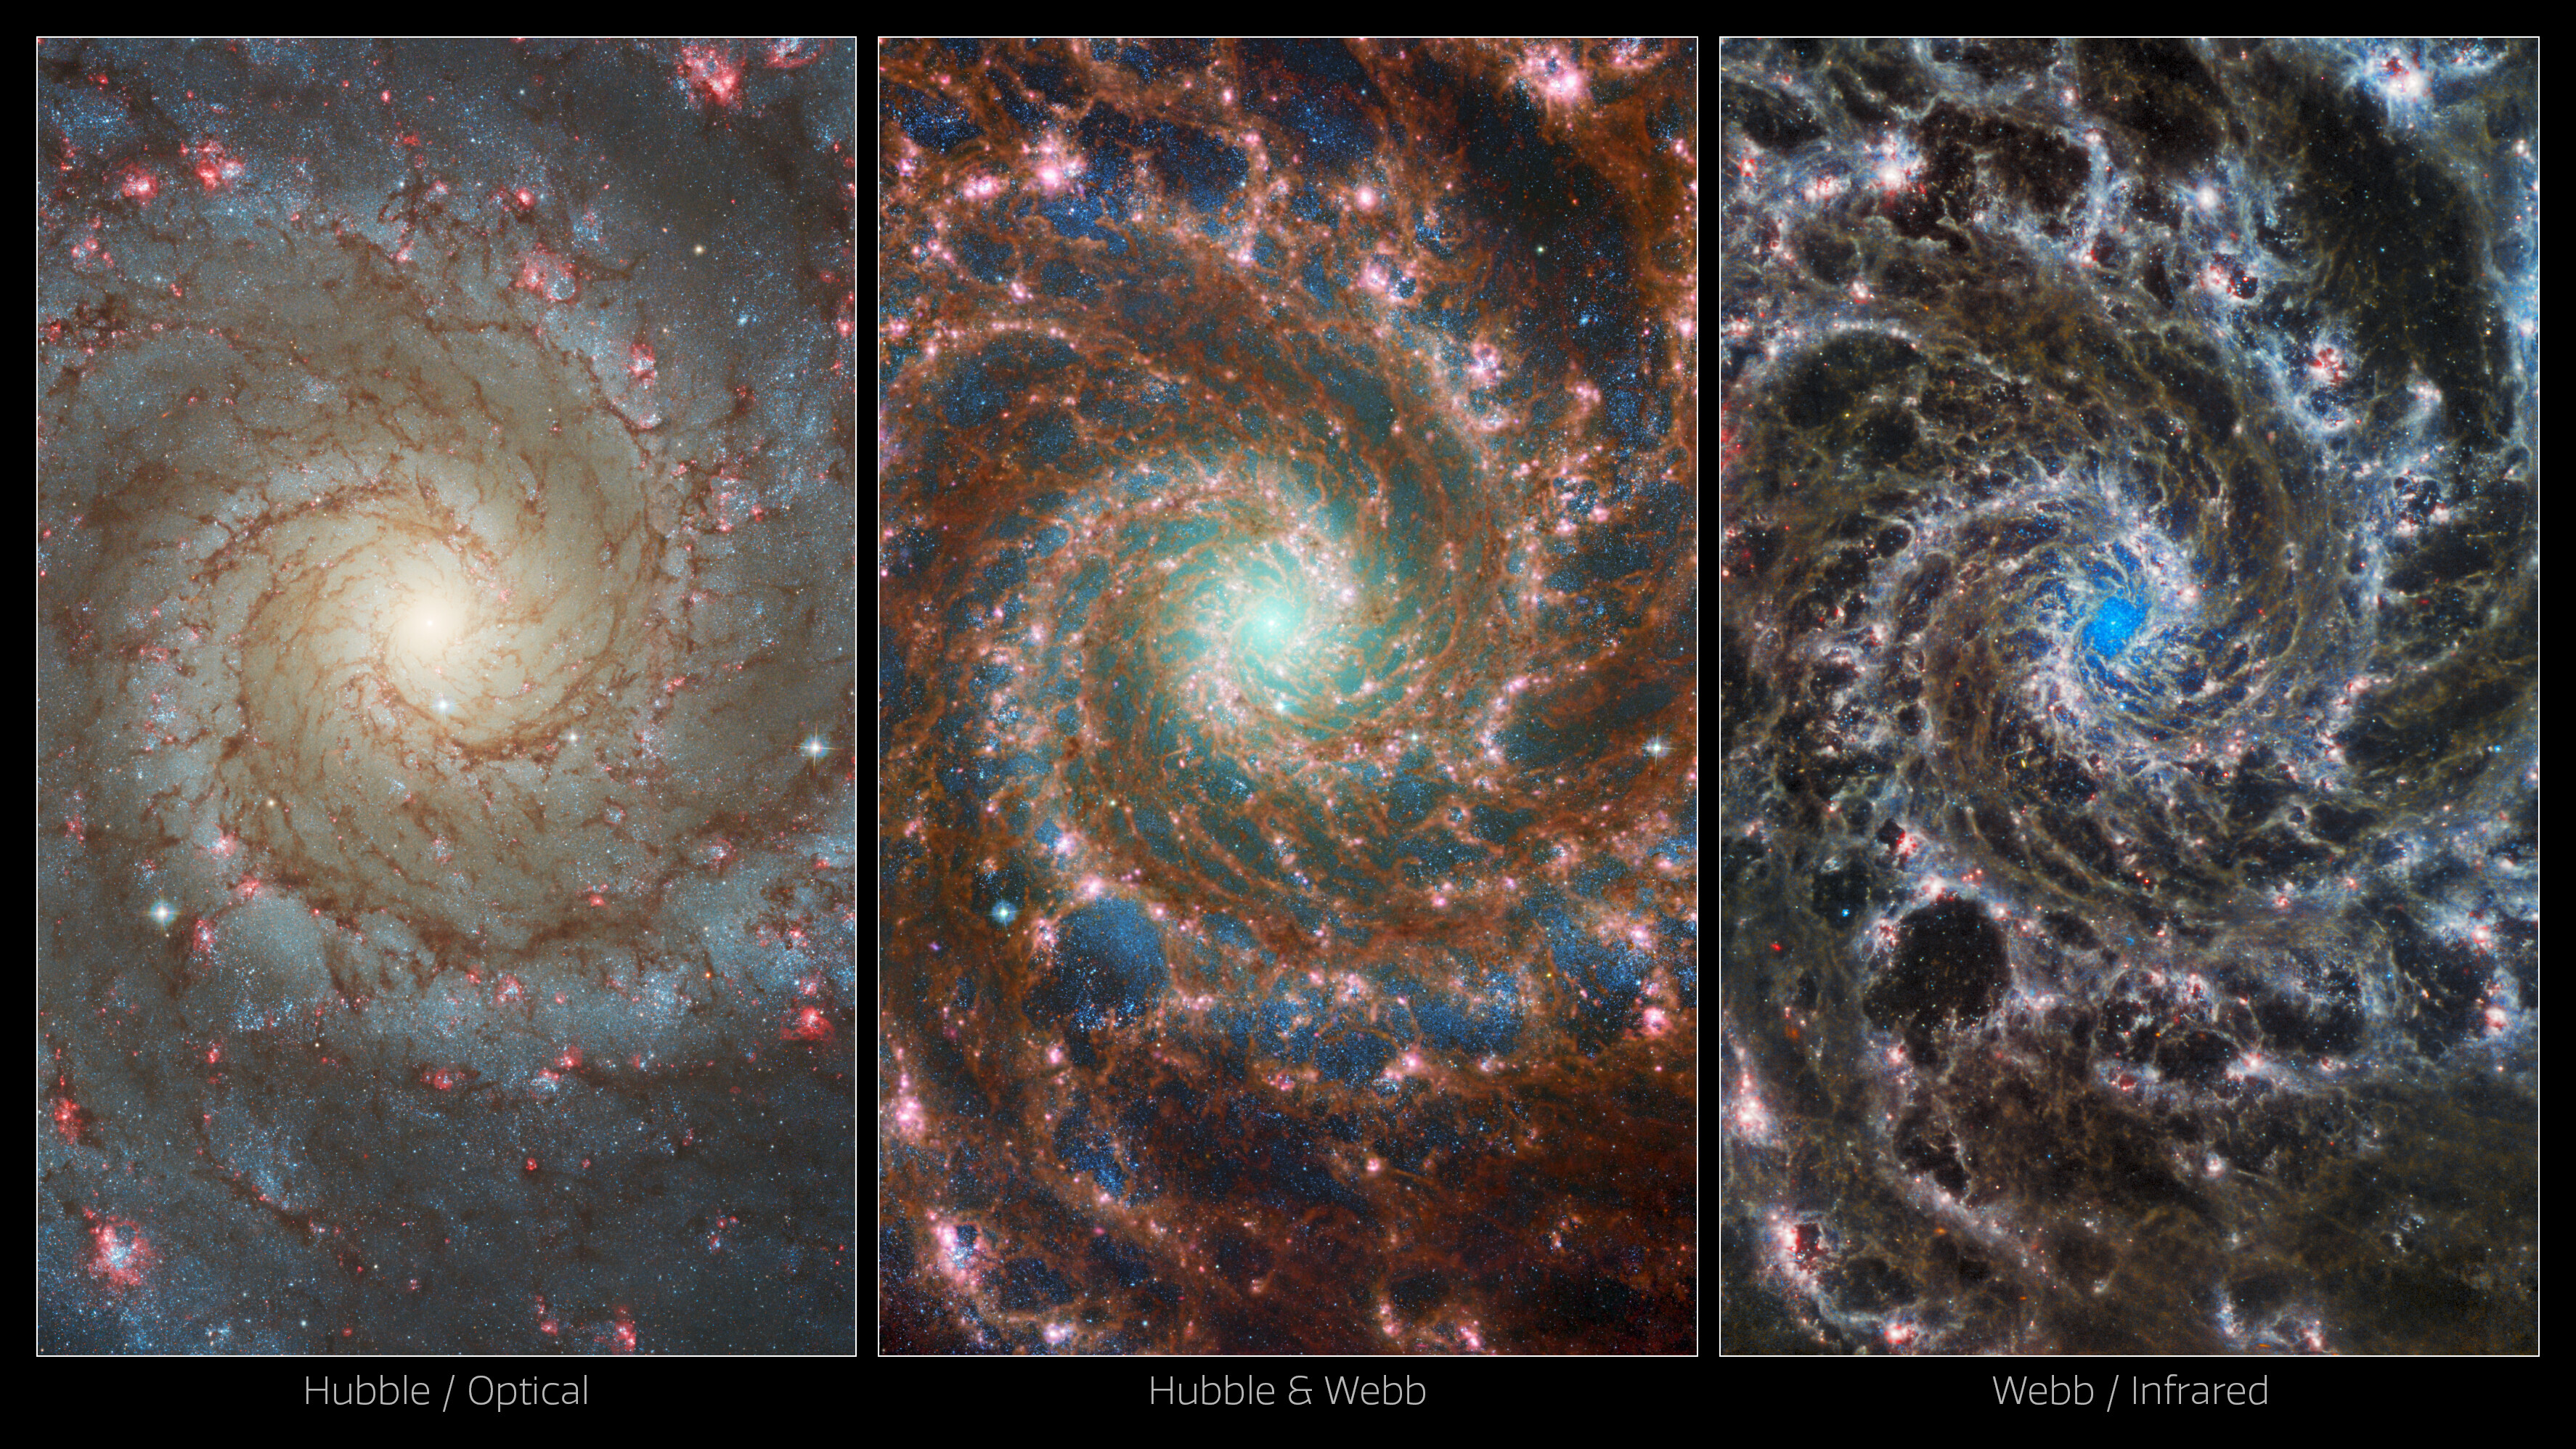 Three images of the Phantom Galaxy, M74, showcase the power of space observatories working together in multiple wavelengths. On the left, the NASA/ESA Hubble Space Telescope’s view of the galaxy ranges from the older, redder stars towards the centre, to younger and bluer stars in its spiral arms, to the most active stellar formation in the red bubbles of H II regions. On the right, the NASA/ESA/CSA James Webb Space Telescope’s image is strikingly different, instead highlighting the masses of gas and dust within the galaxy’s arms, and the dense cluster of stars at its core.